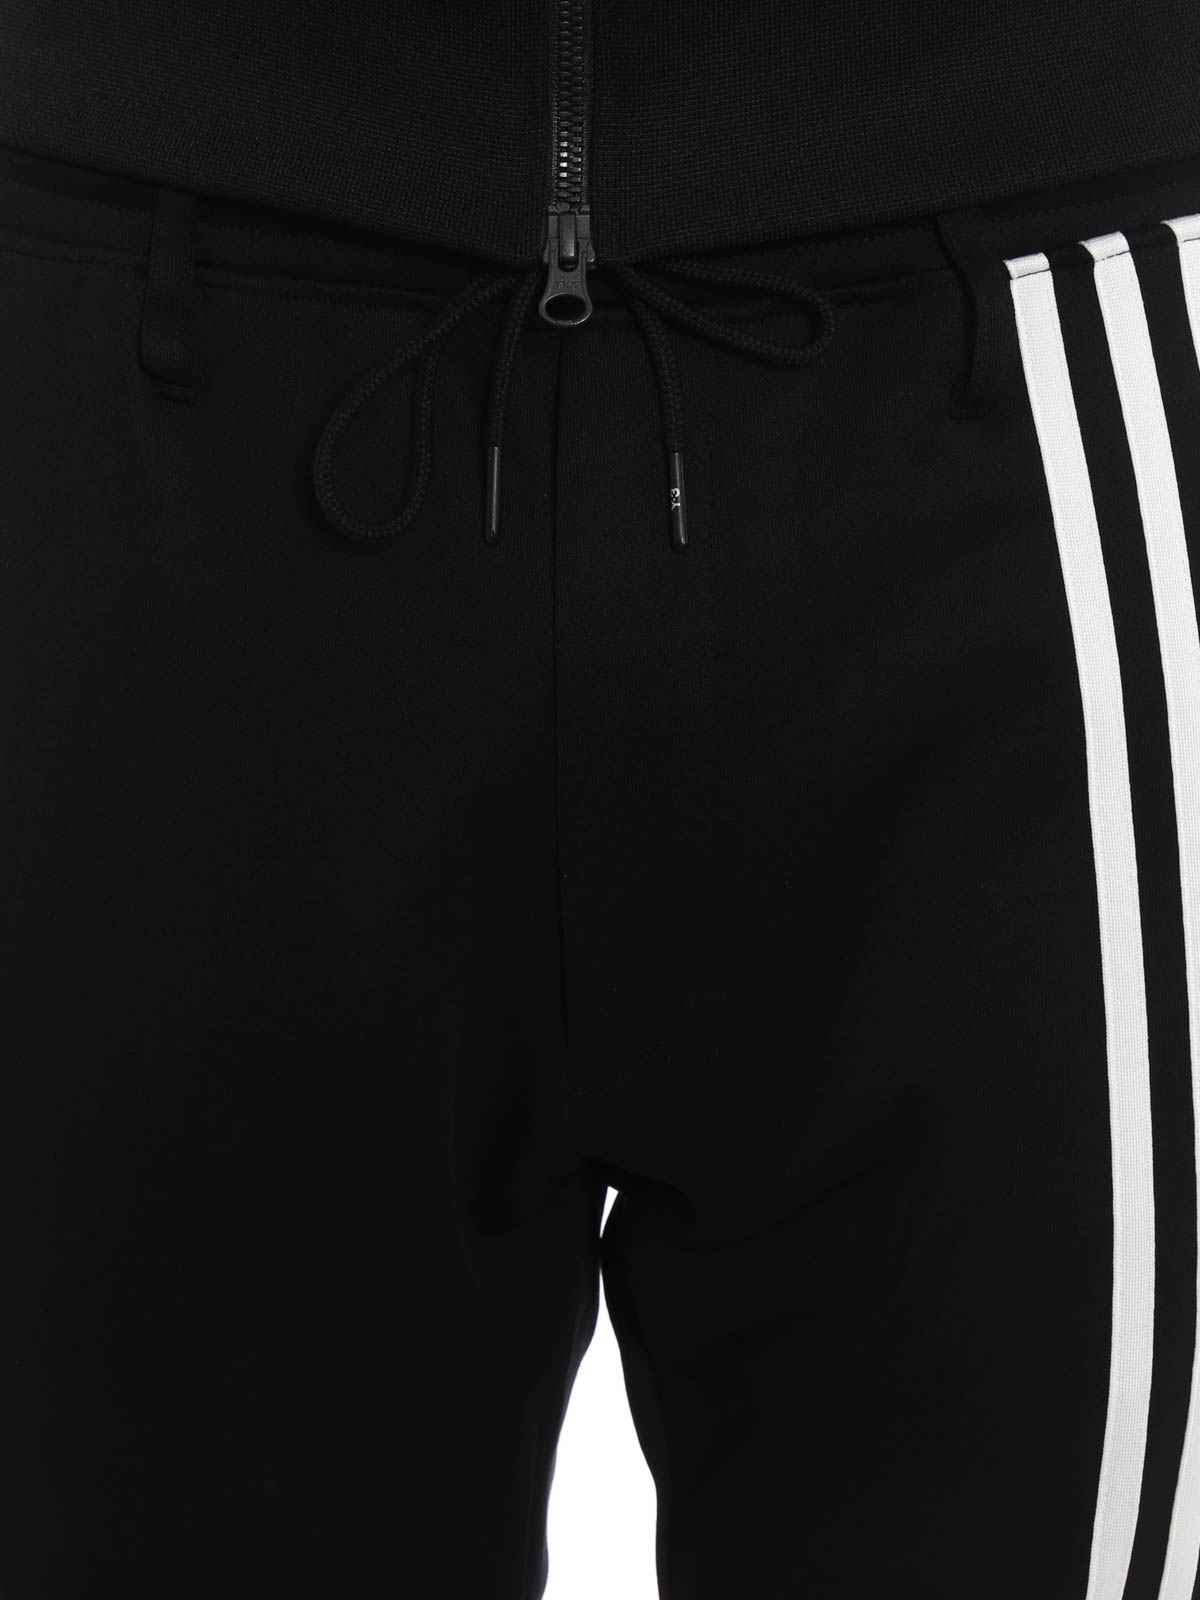 y3 tracksuits